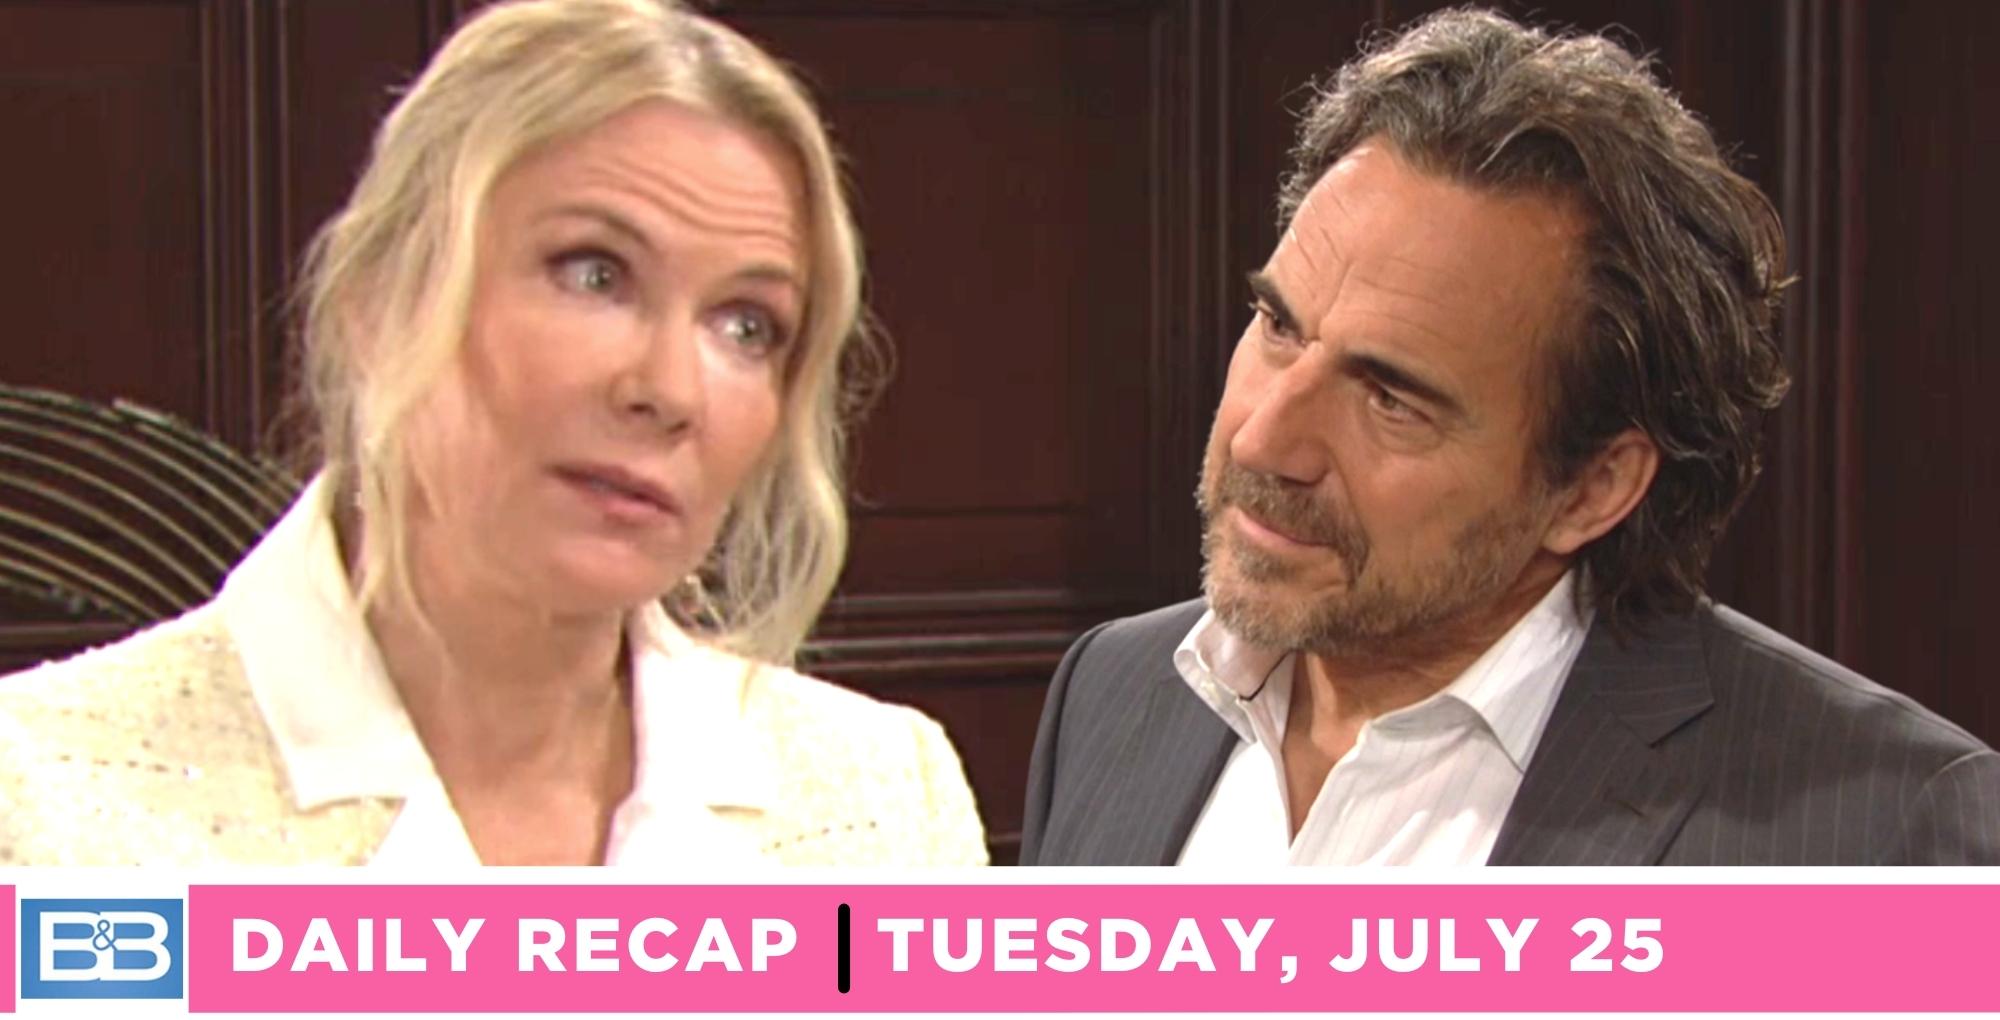 brooke logan told ridge forrester a secret on the bold and the beautiful recap for tuesday, July 25, 2023.